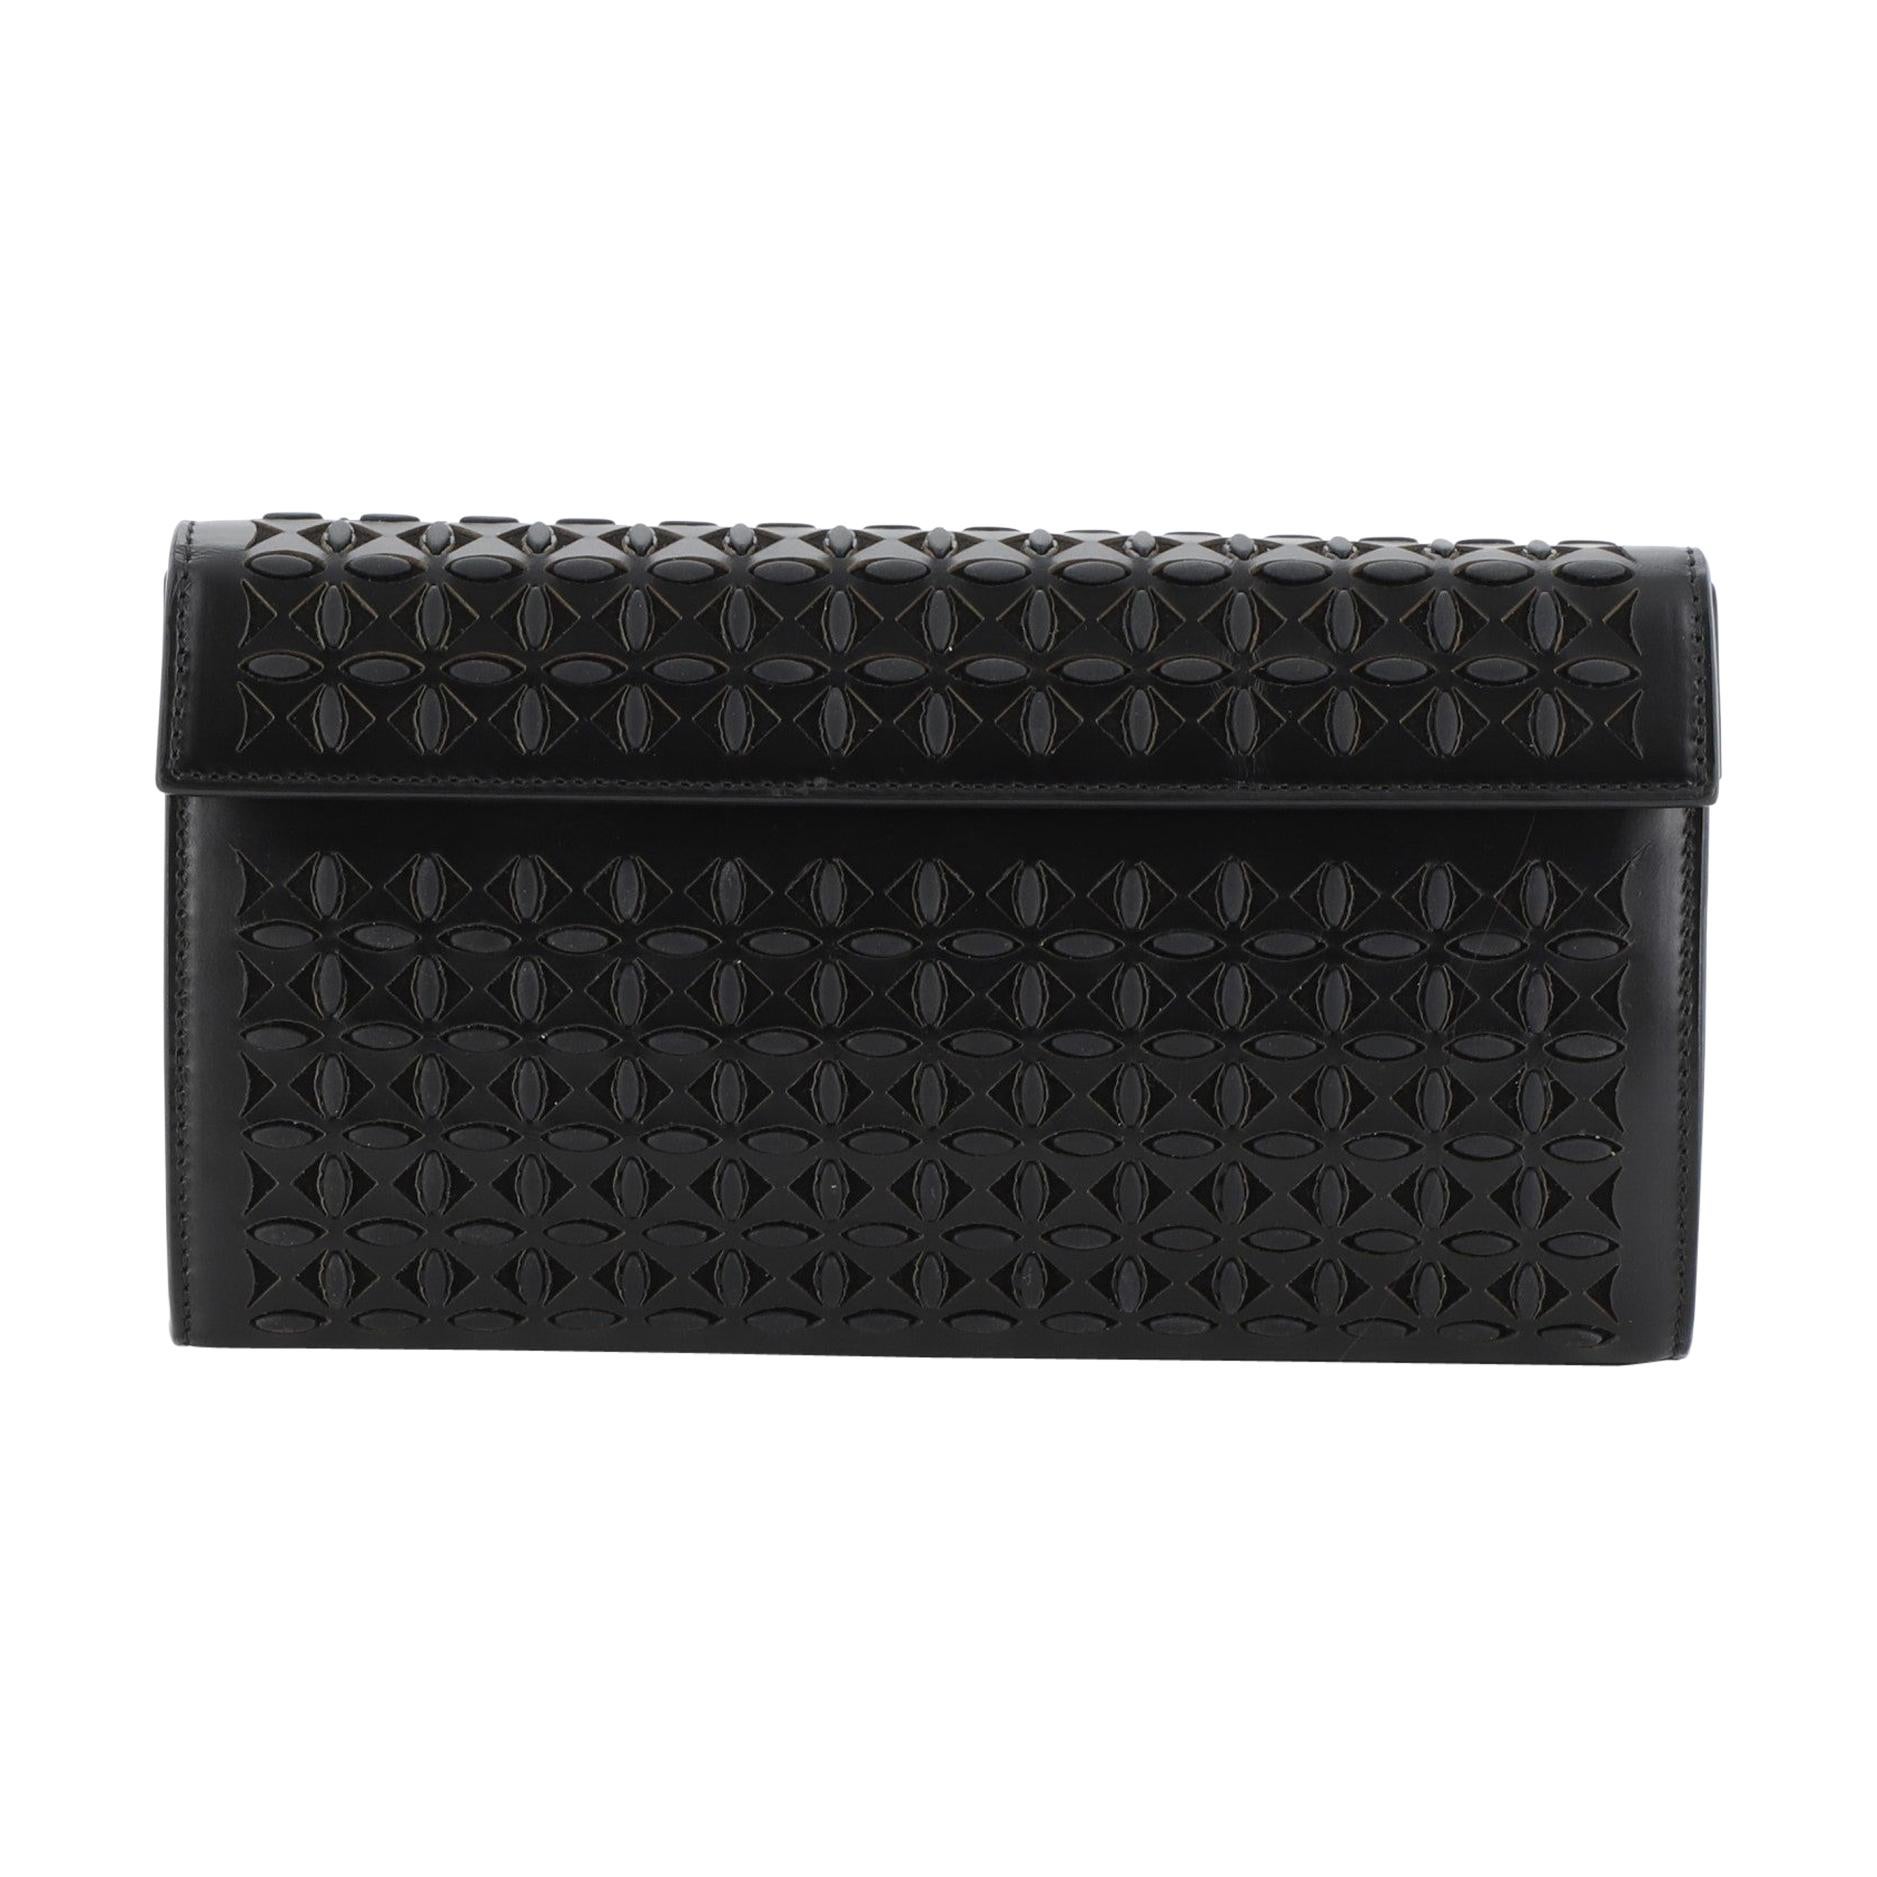 Alaia Flap Clutch Laser Cut Leather Small